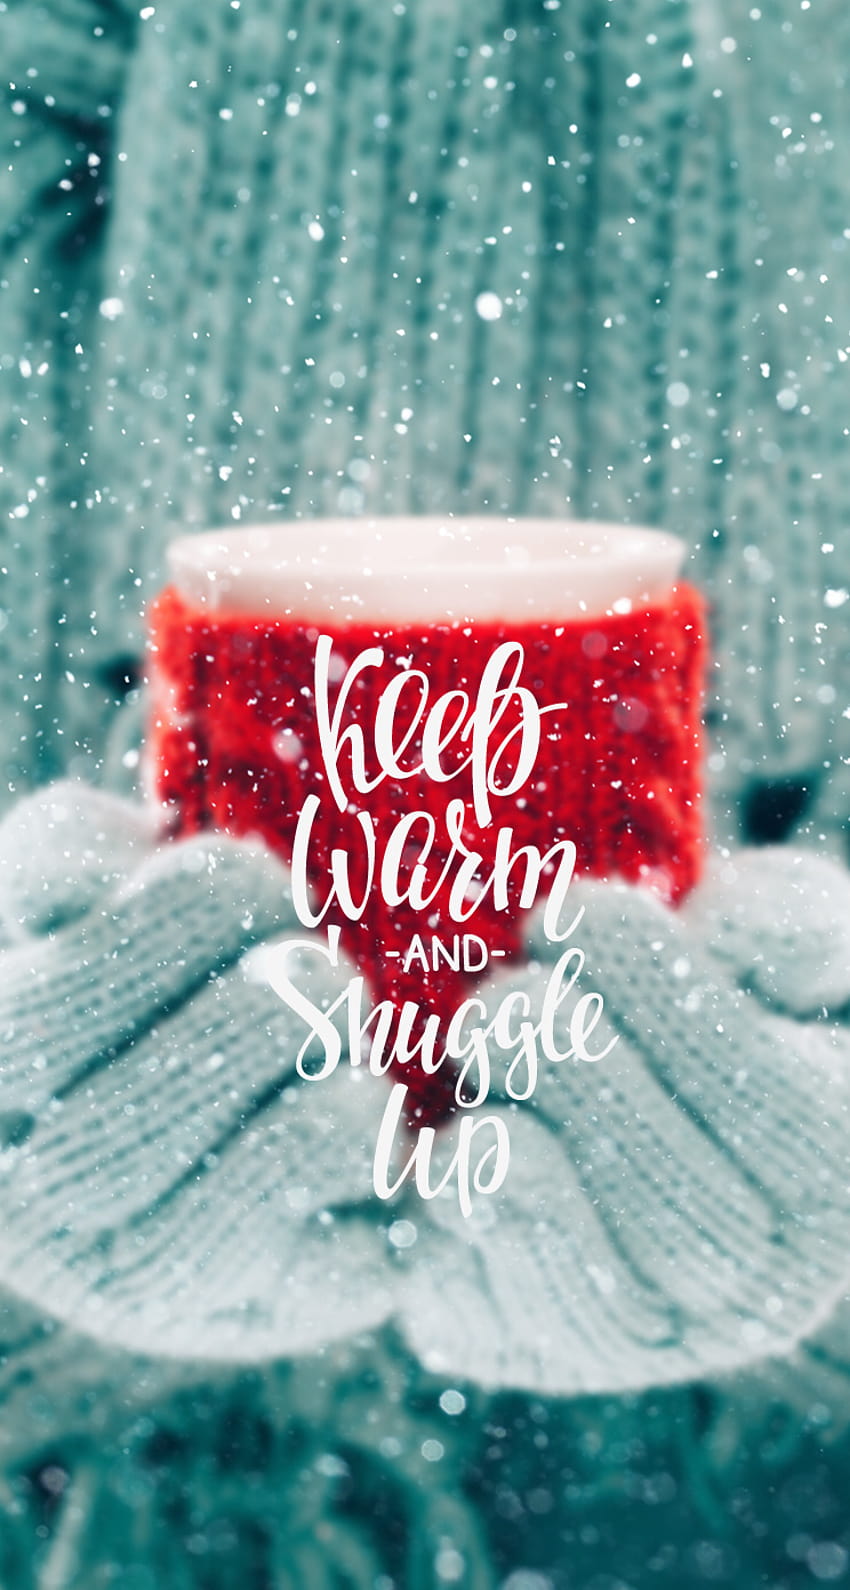 Keep warm and snuggle up, cozy winter iphone HD phone wallpaper